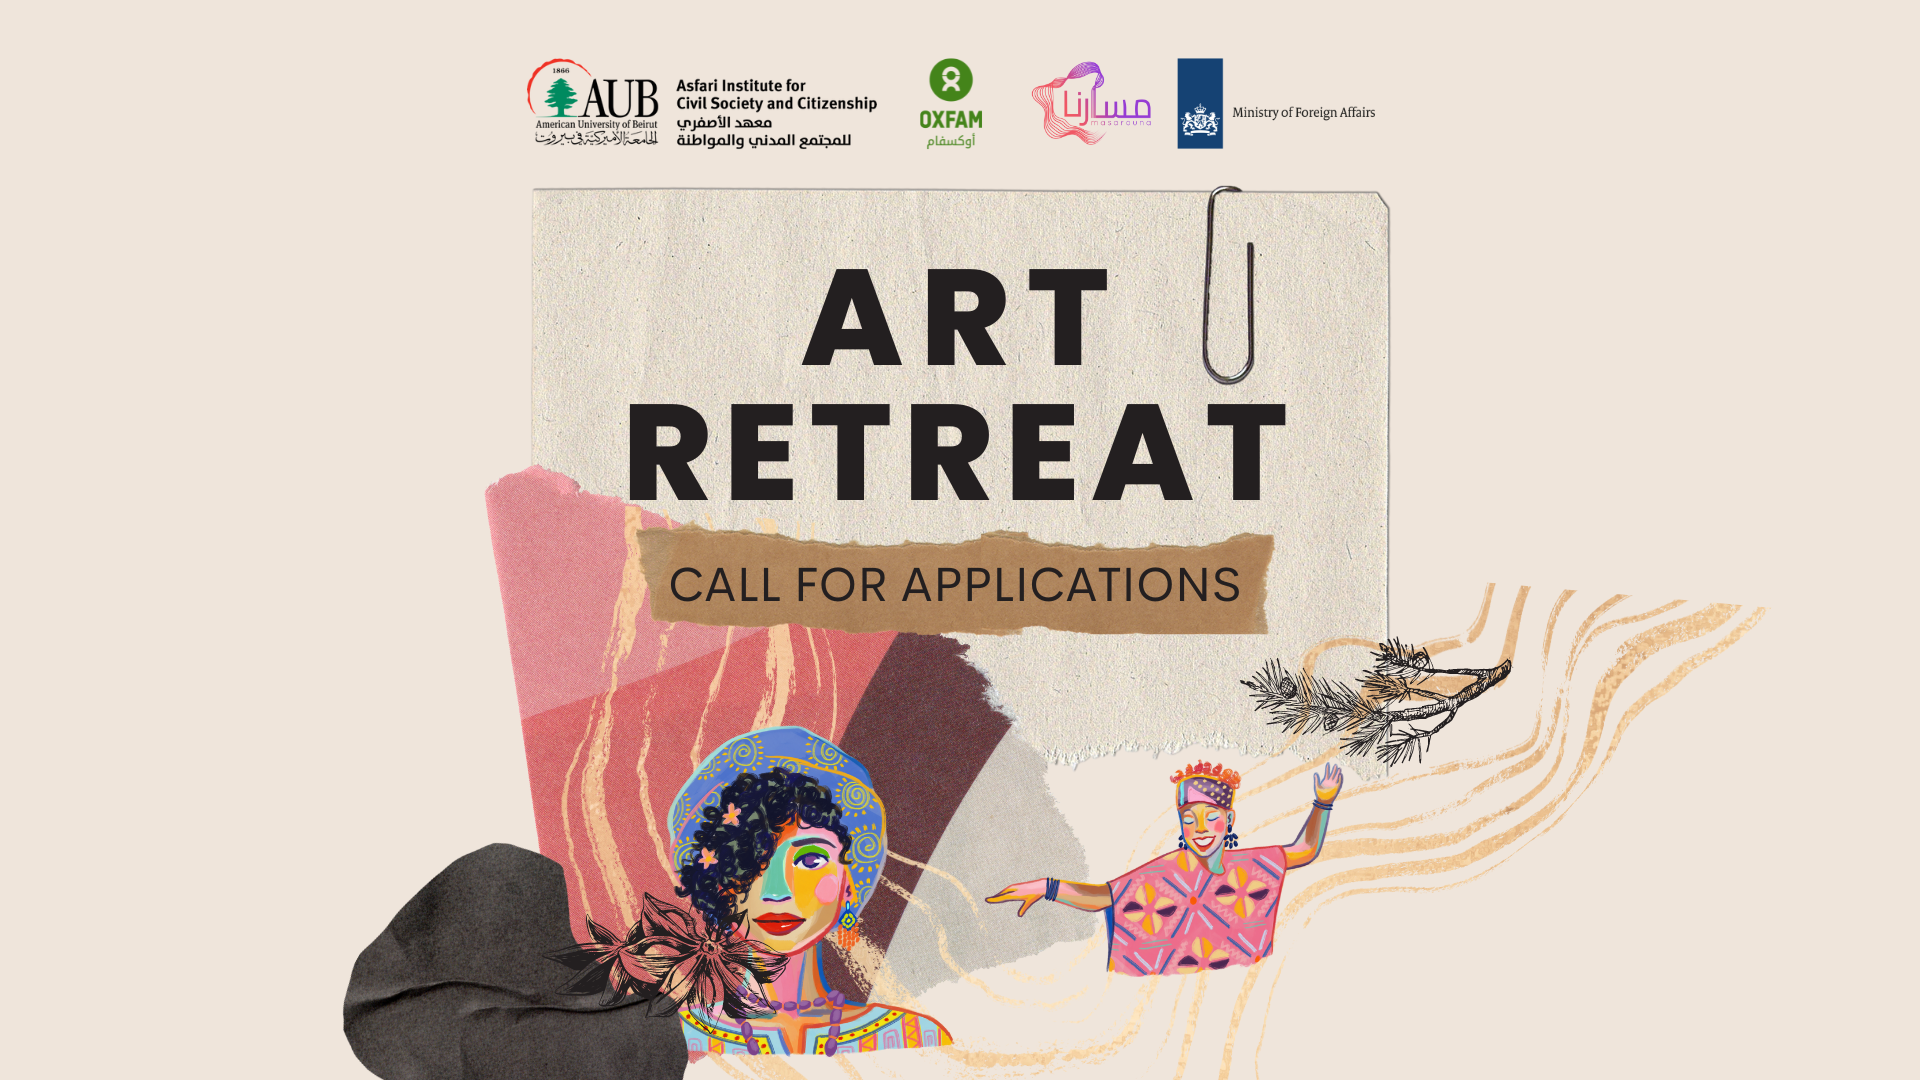 The Asfari Sexual and Reproductive Health and Rights (SRHR) Art Retreat